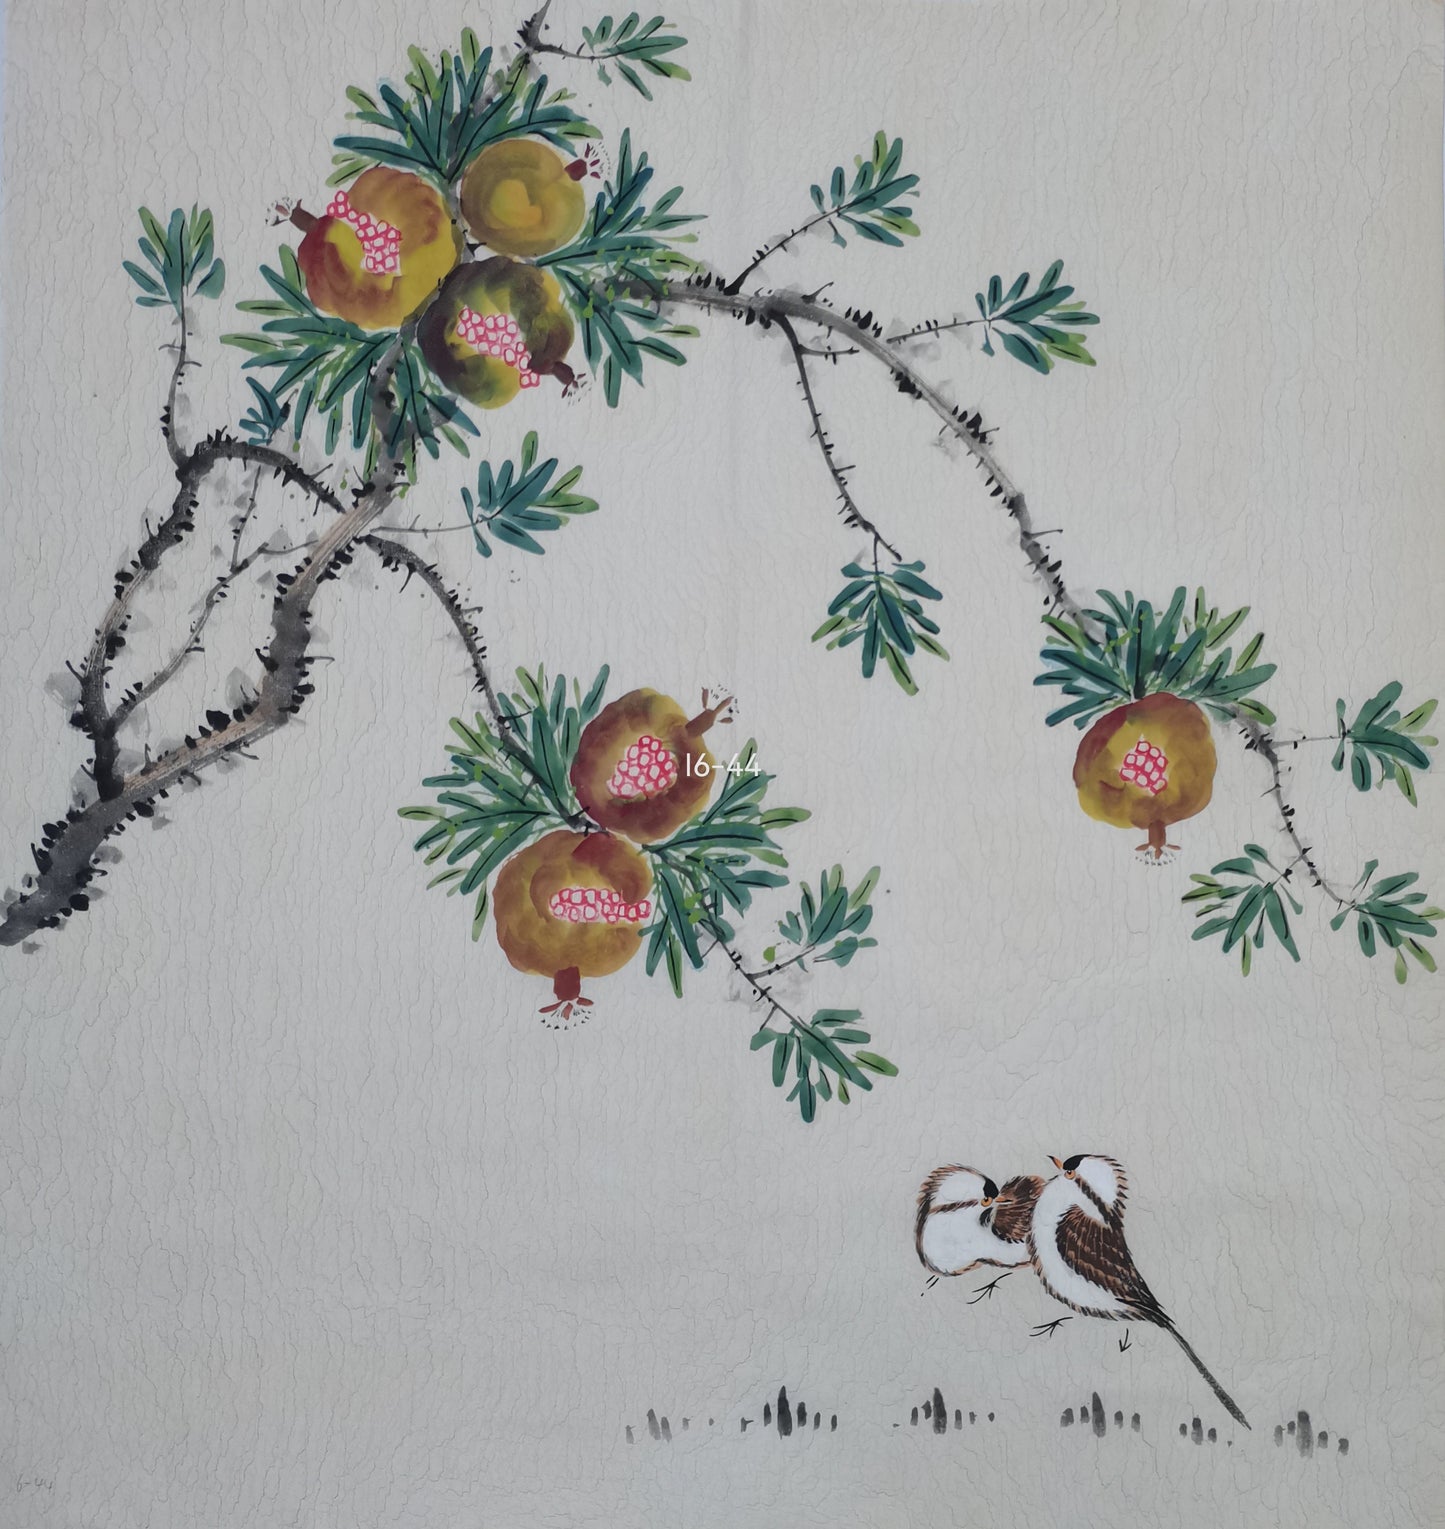 Chinese painting-plant. Pomegranate and birds. Study decoration